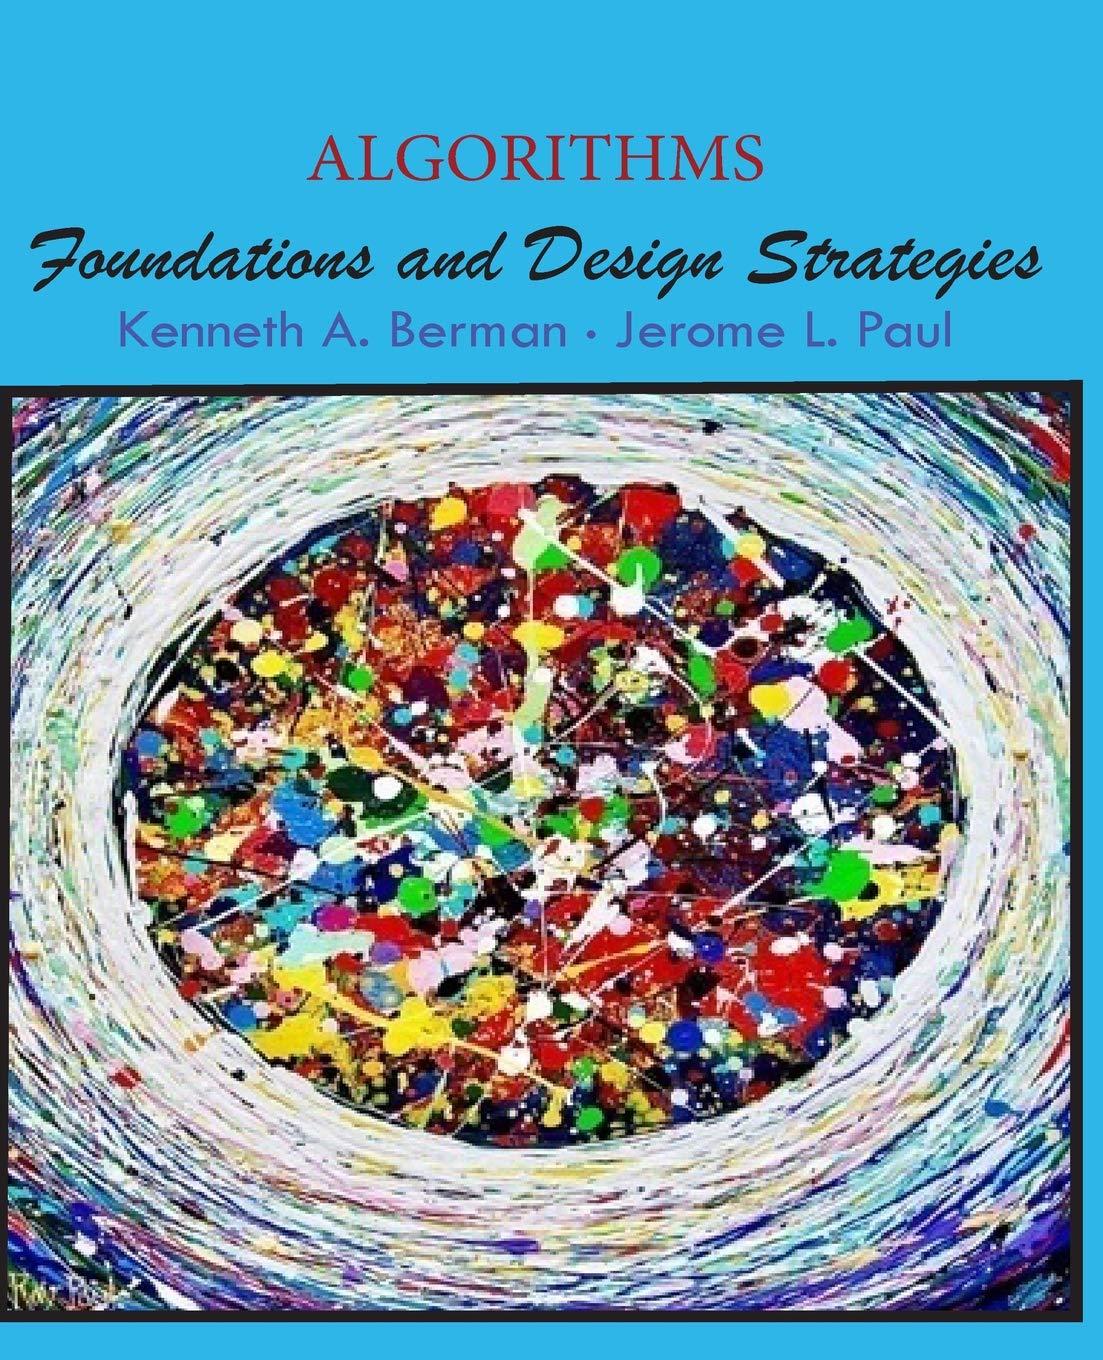 algorithms foundations and design strategies 1st edition kenneth a berman, jerome l paul 0692993762,